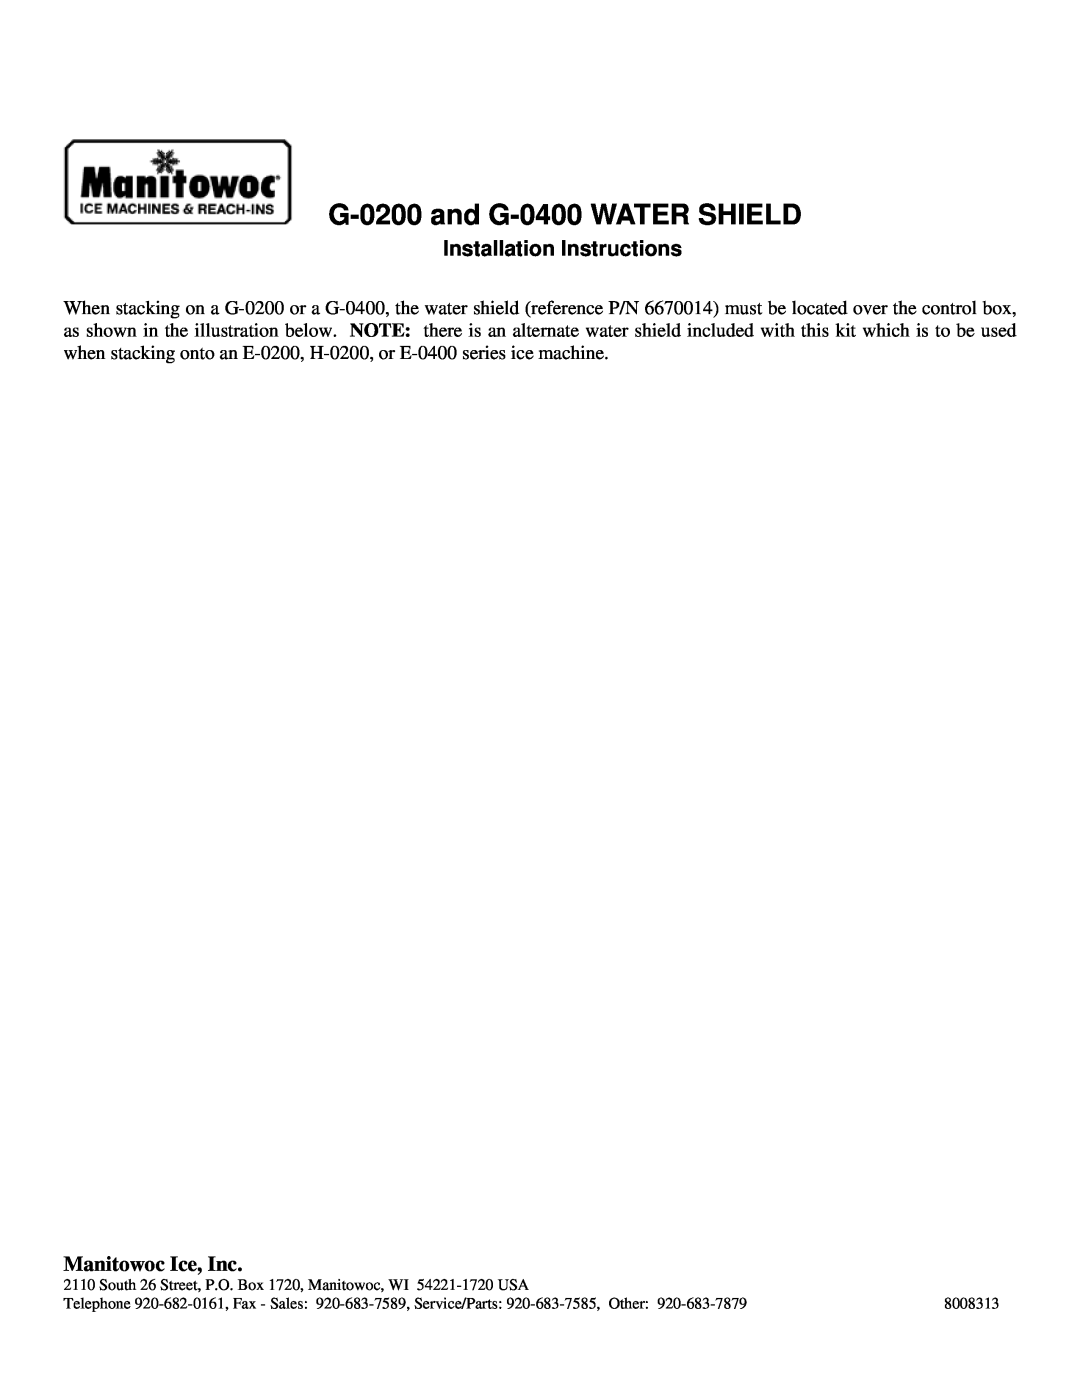 Manitowoc Ice installation instructions G-0200and G-0400WATER SHIELD, Installation Instructions, Manitowoc Ice, Inc 